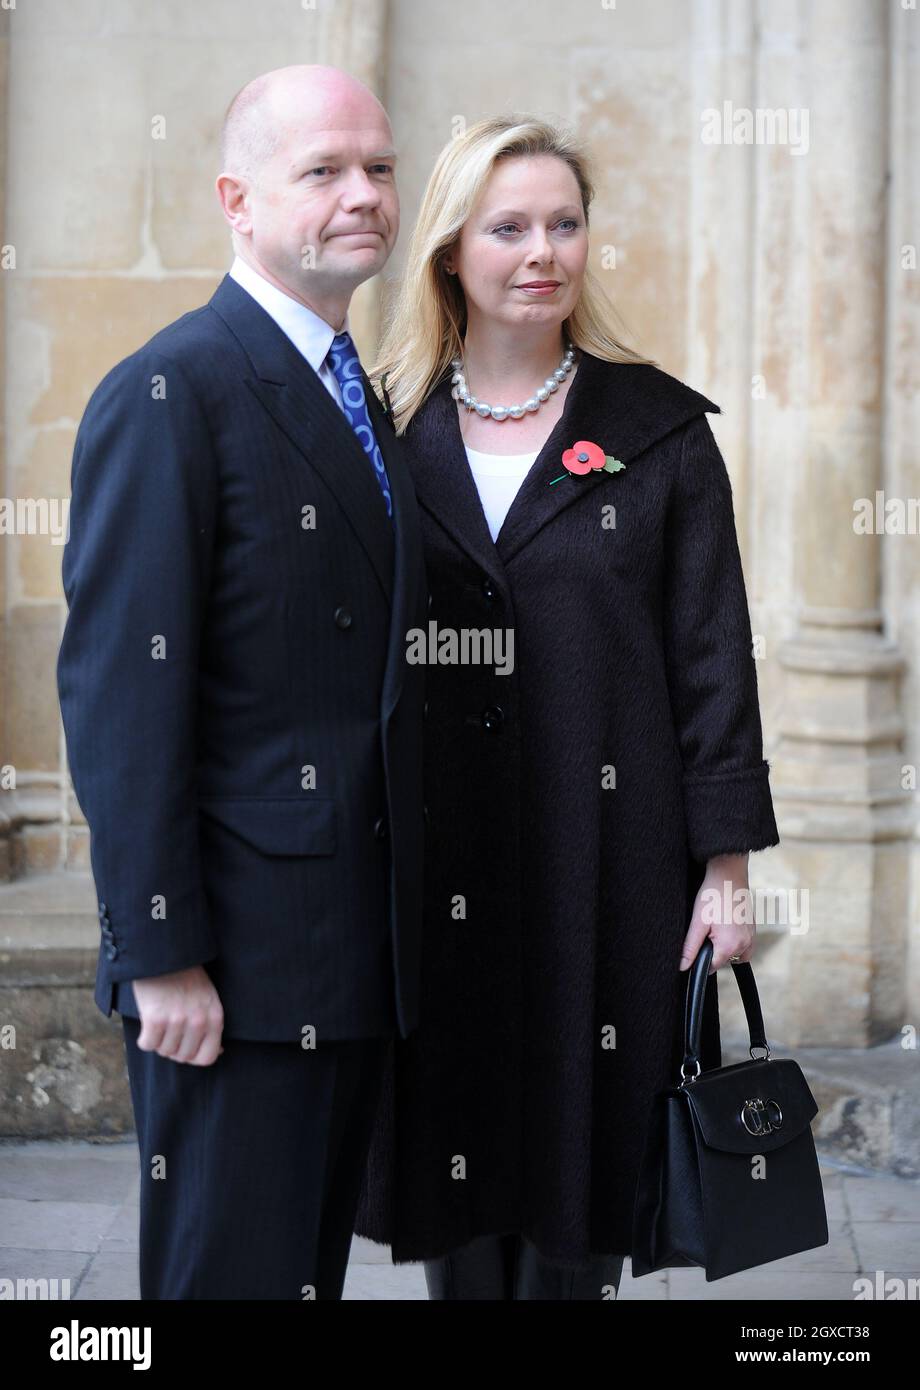 William Hague and wife Ffion Jenkins arrive for a special service commemorating the passing of the generation of combatants from World War I at Westminster Abbey on November 11, 2009 in London, England. Stock Photo